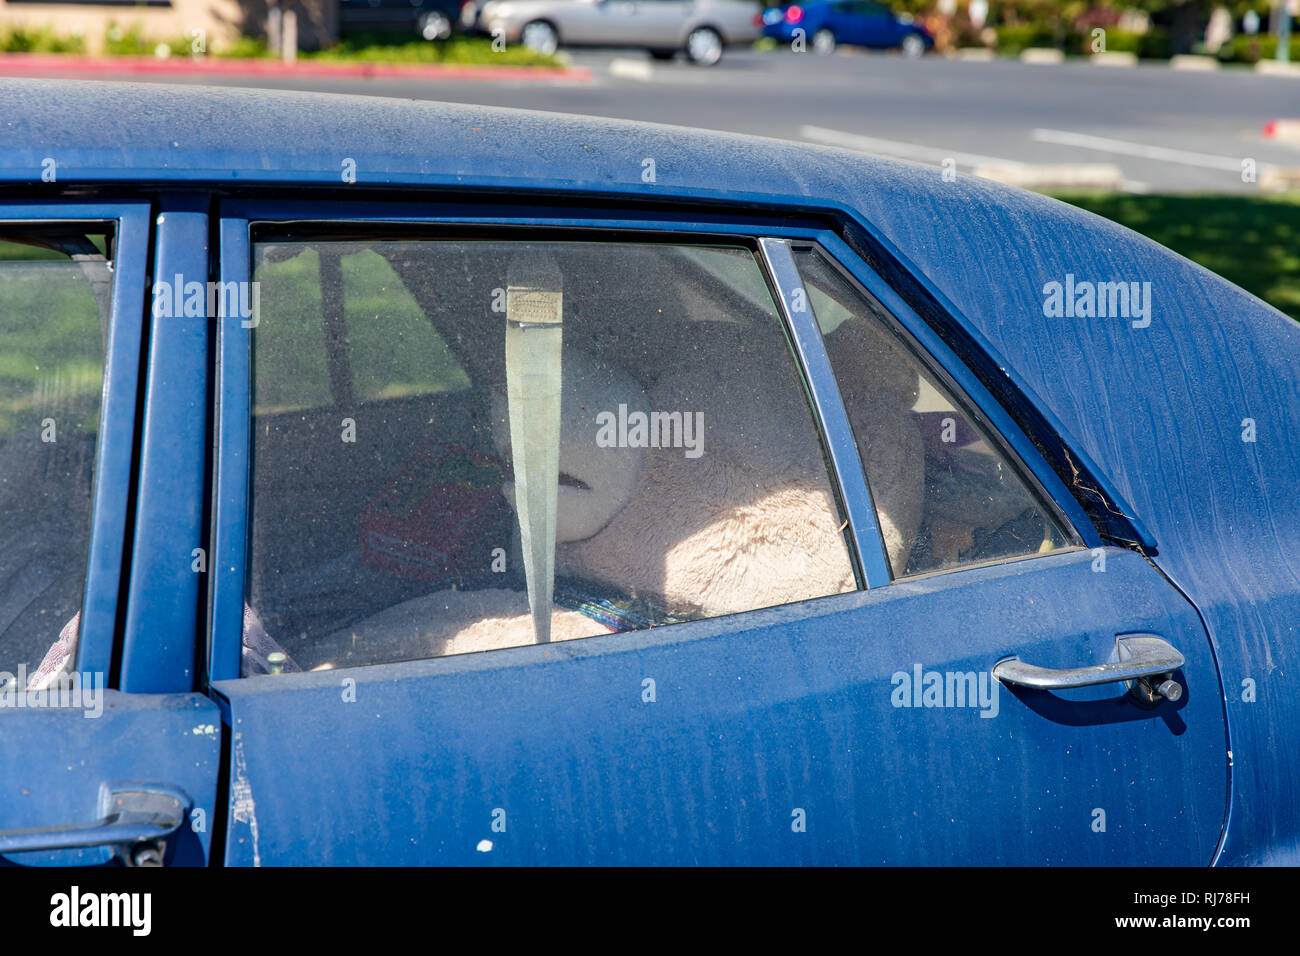 Large teddy bear on the back seat of a dirty car Stock Photo